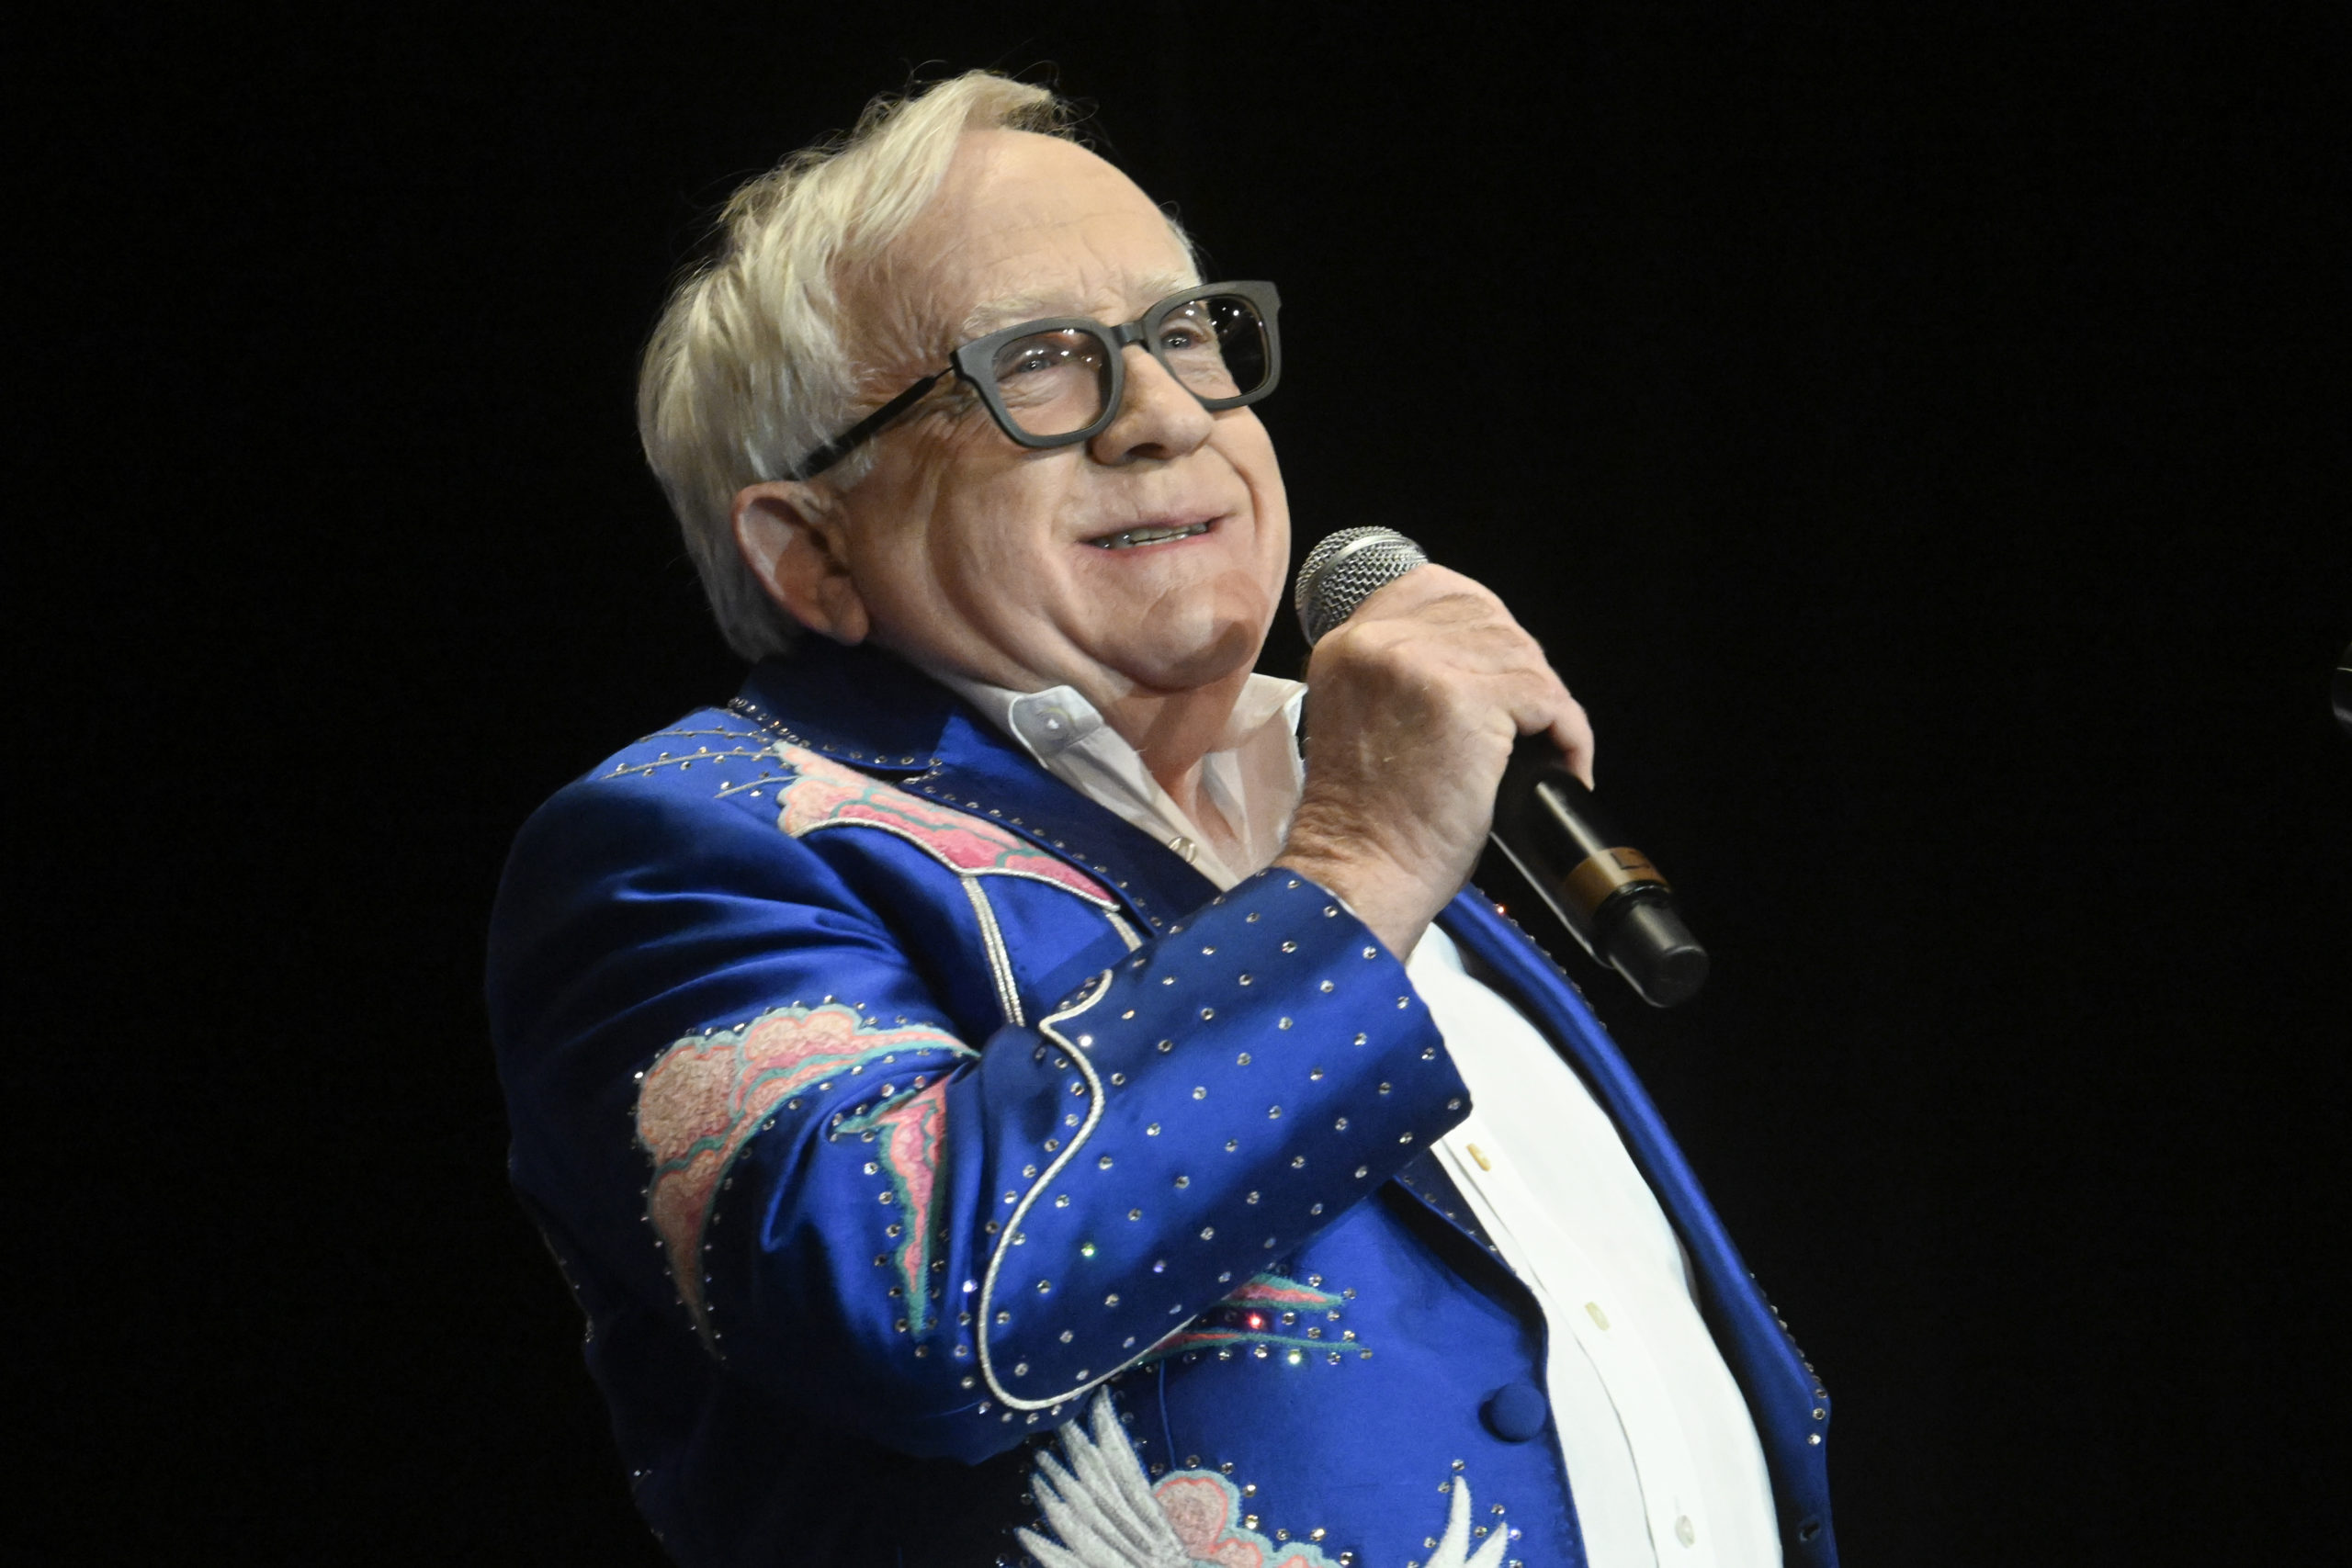 With a mix of gospel music favorites and heartfelt reflection, Leslie Jordan wows the RISE22 crowd. 